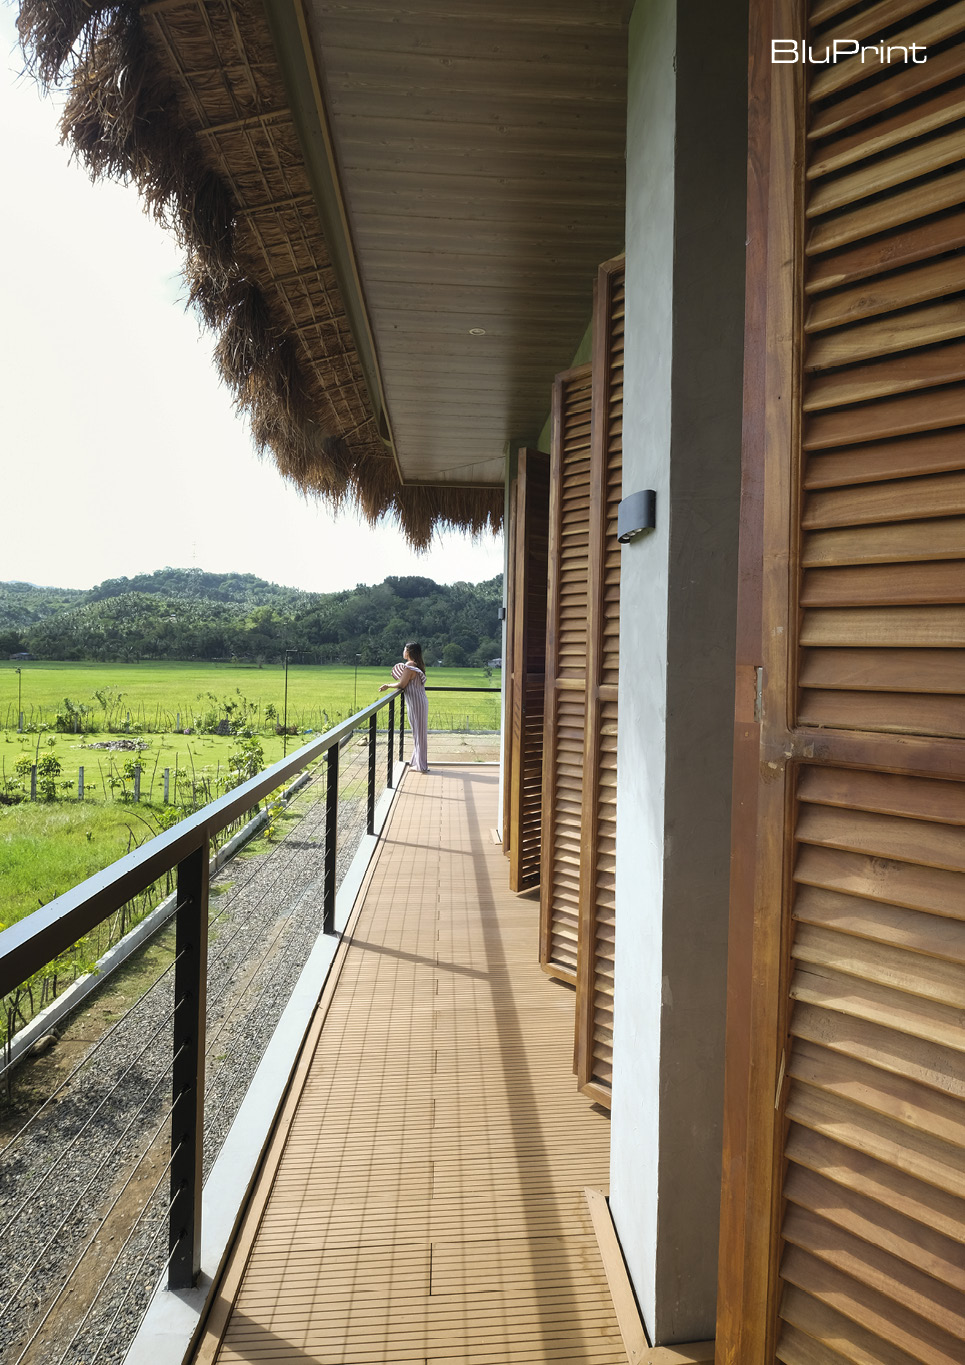 Window details of a modern bahay kubo from the wrap around balcony with views of nature.